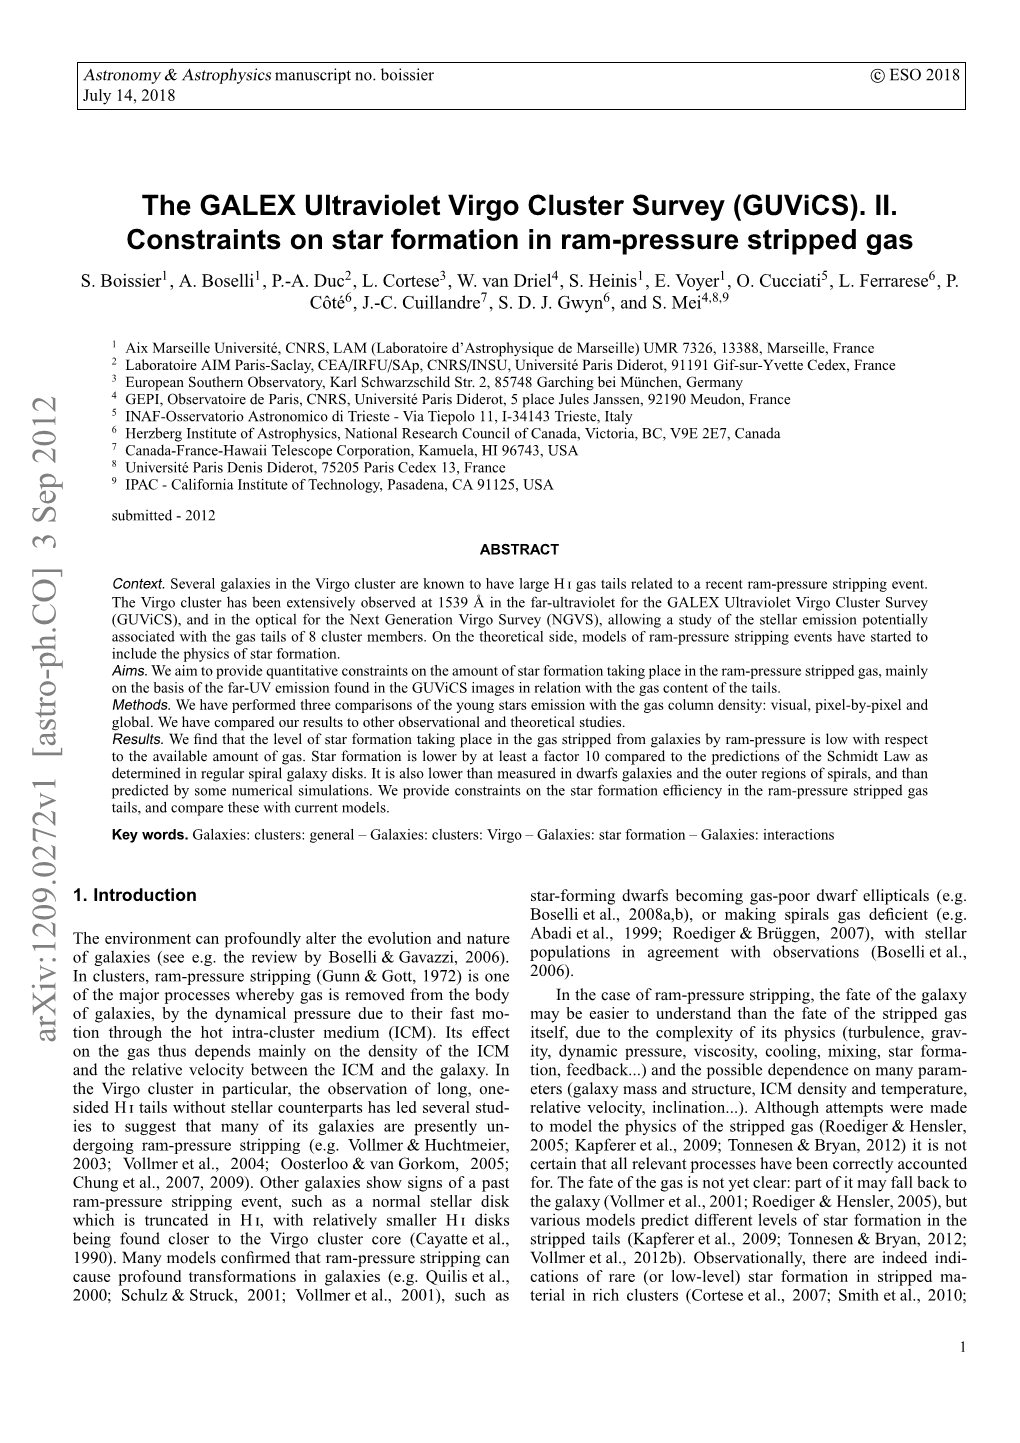 The GALEX Ultraviolet Virgo Cluster Survey (Guvics). II. Constraints on Star Formation in Ram-Pressure Stripped